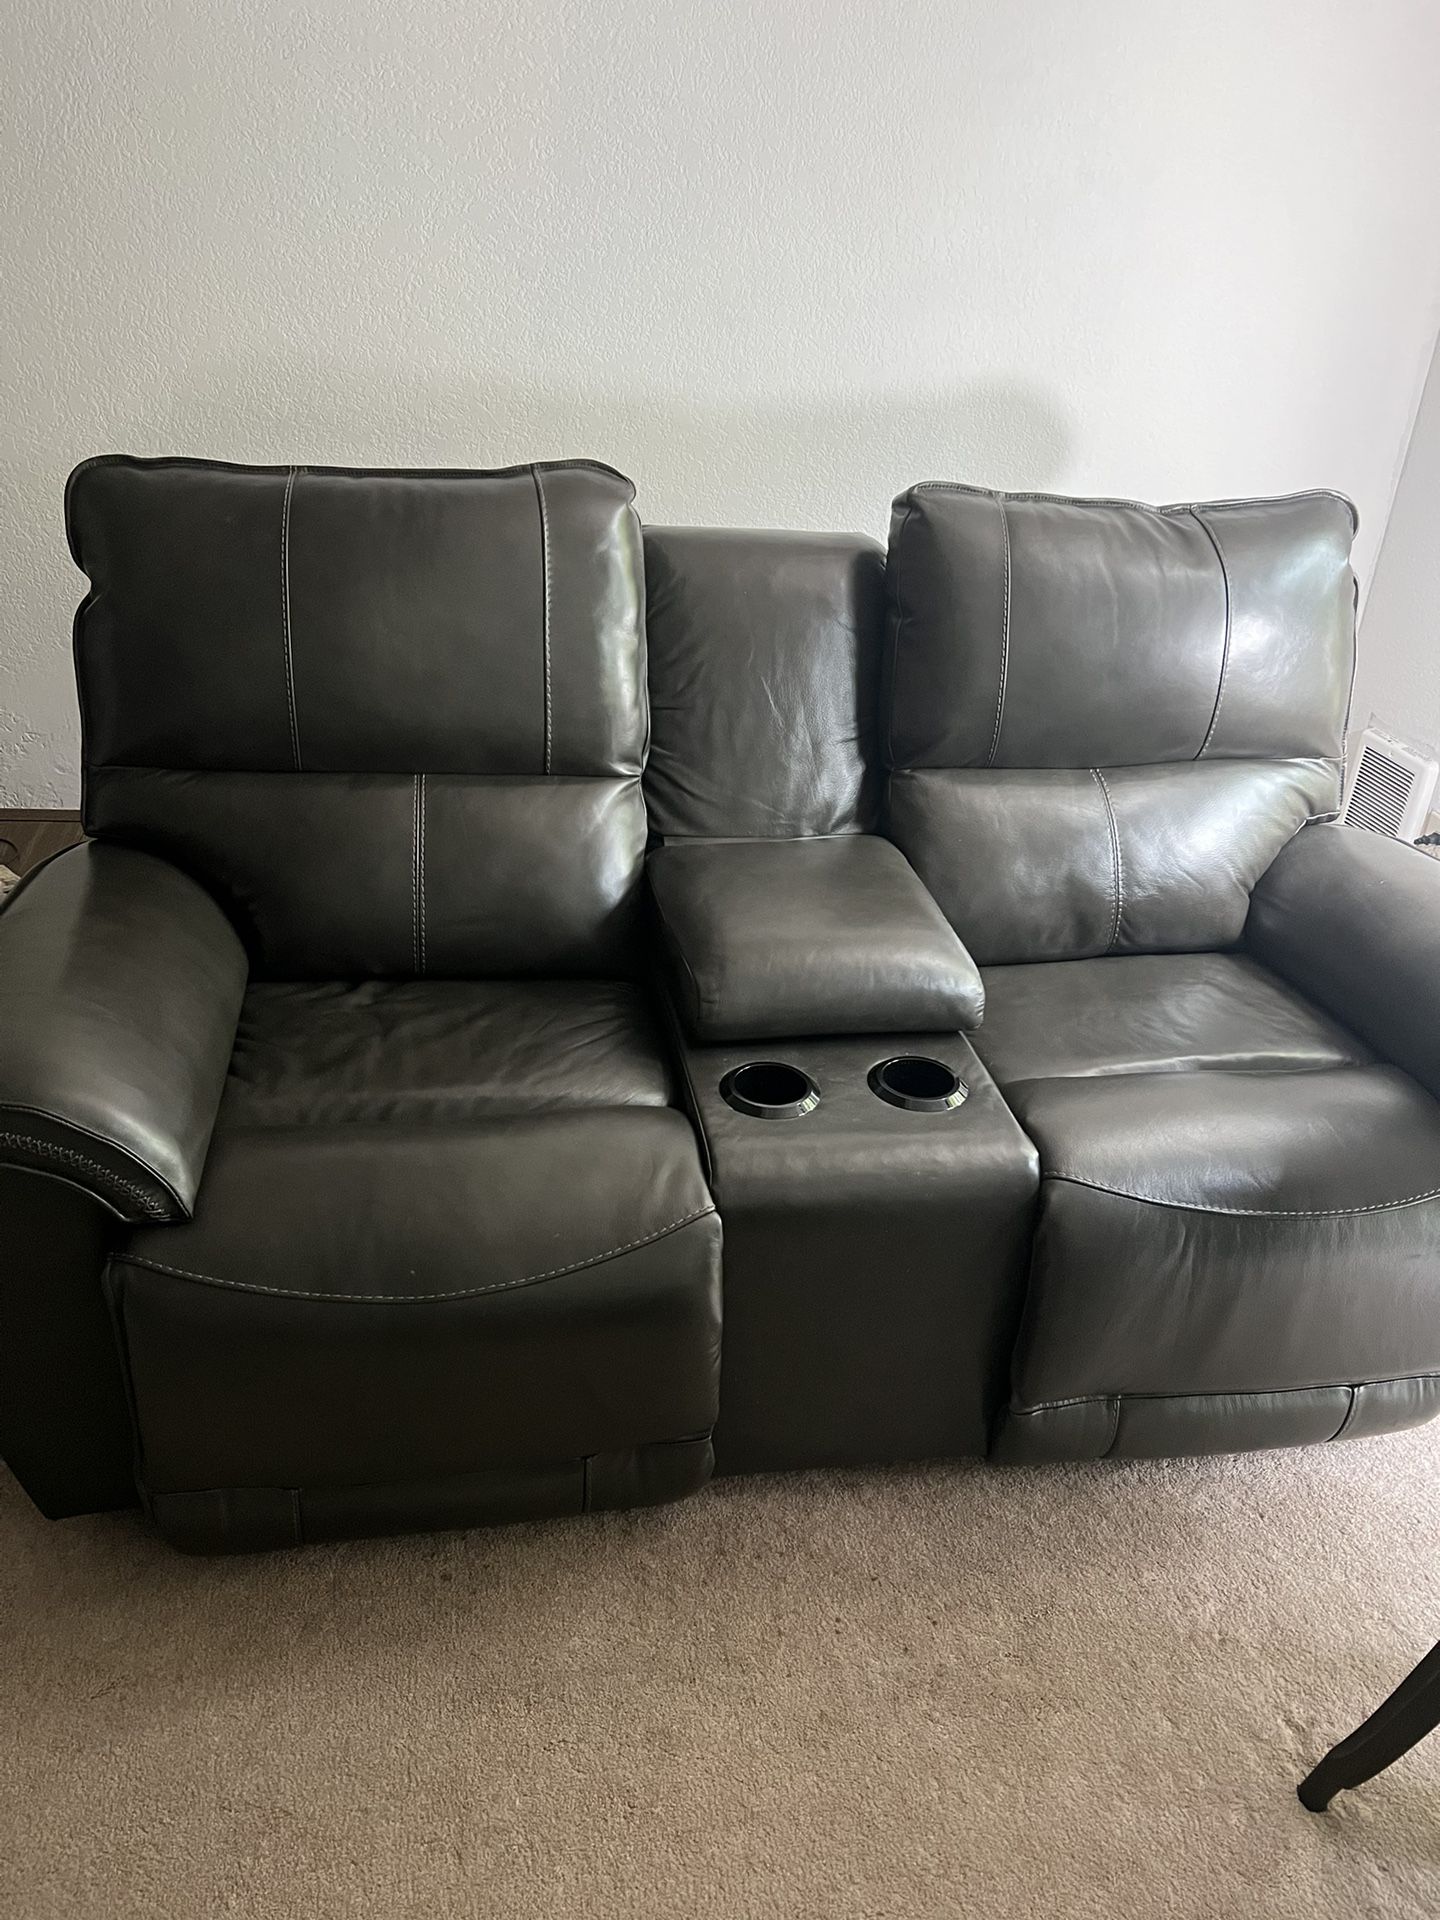 Lazboy Leather Recliner Sofa With Outlet Console